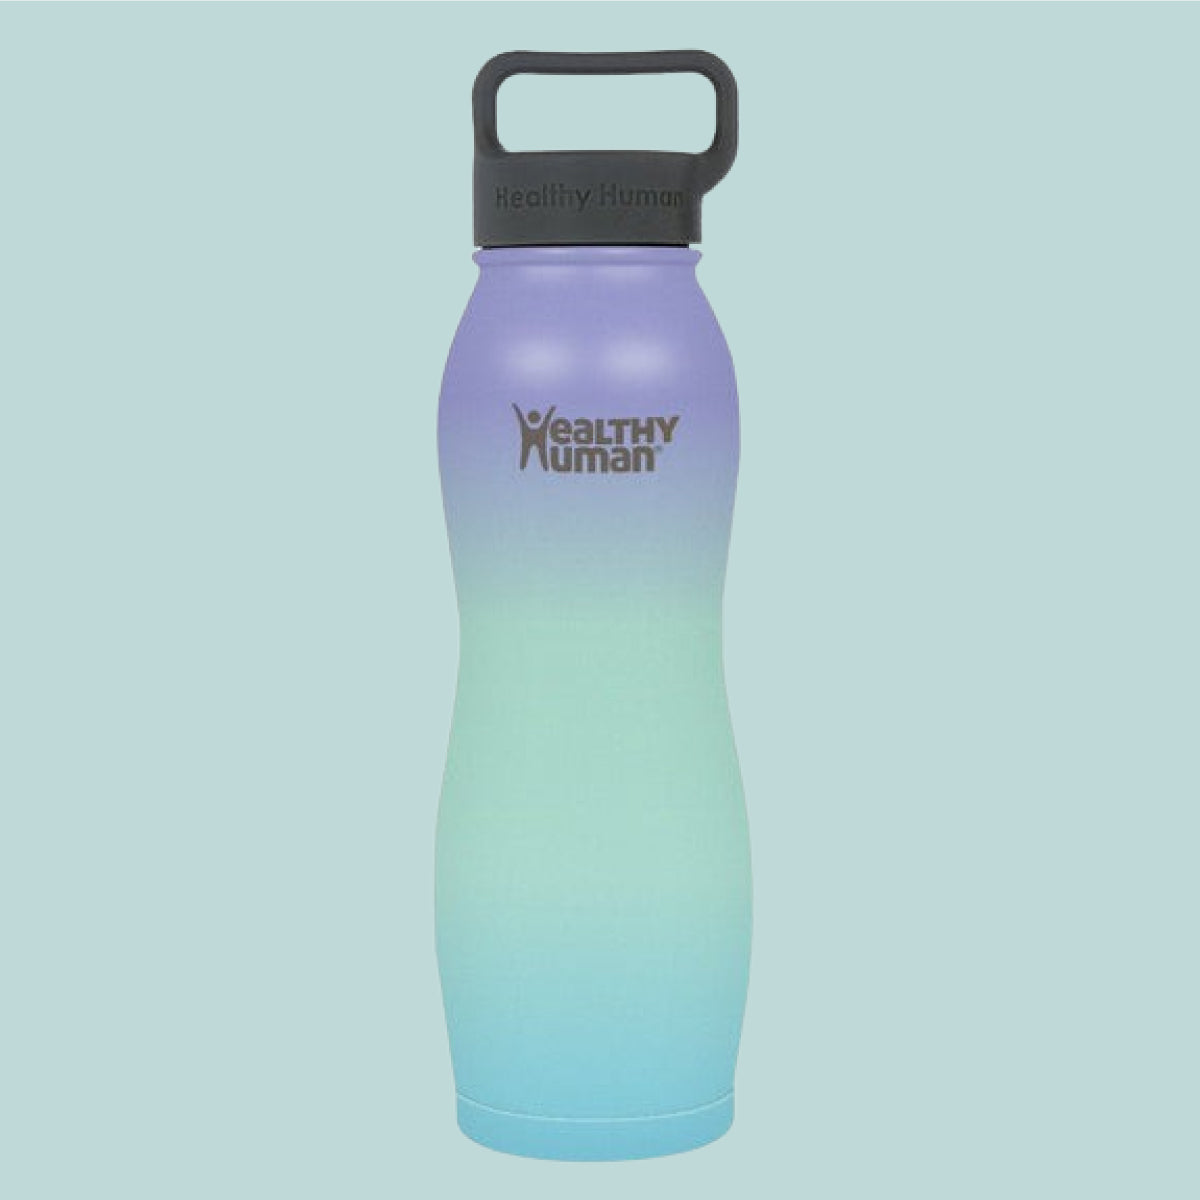 Chilly's Bottles Reviews  Reviewers Are Unhappy With Customer